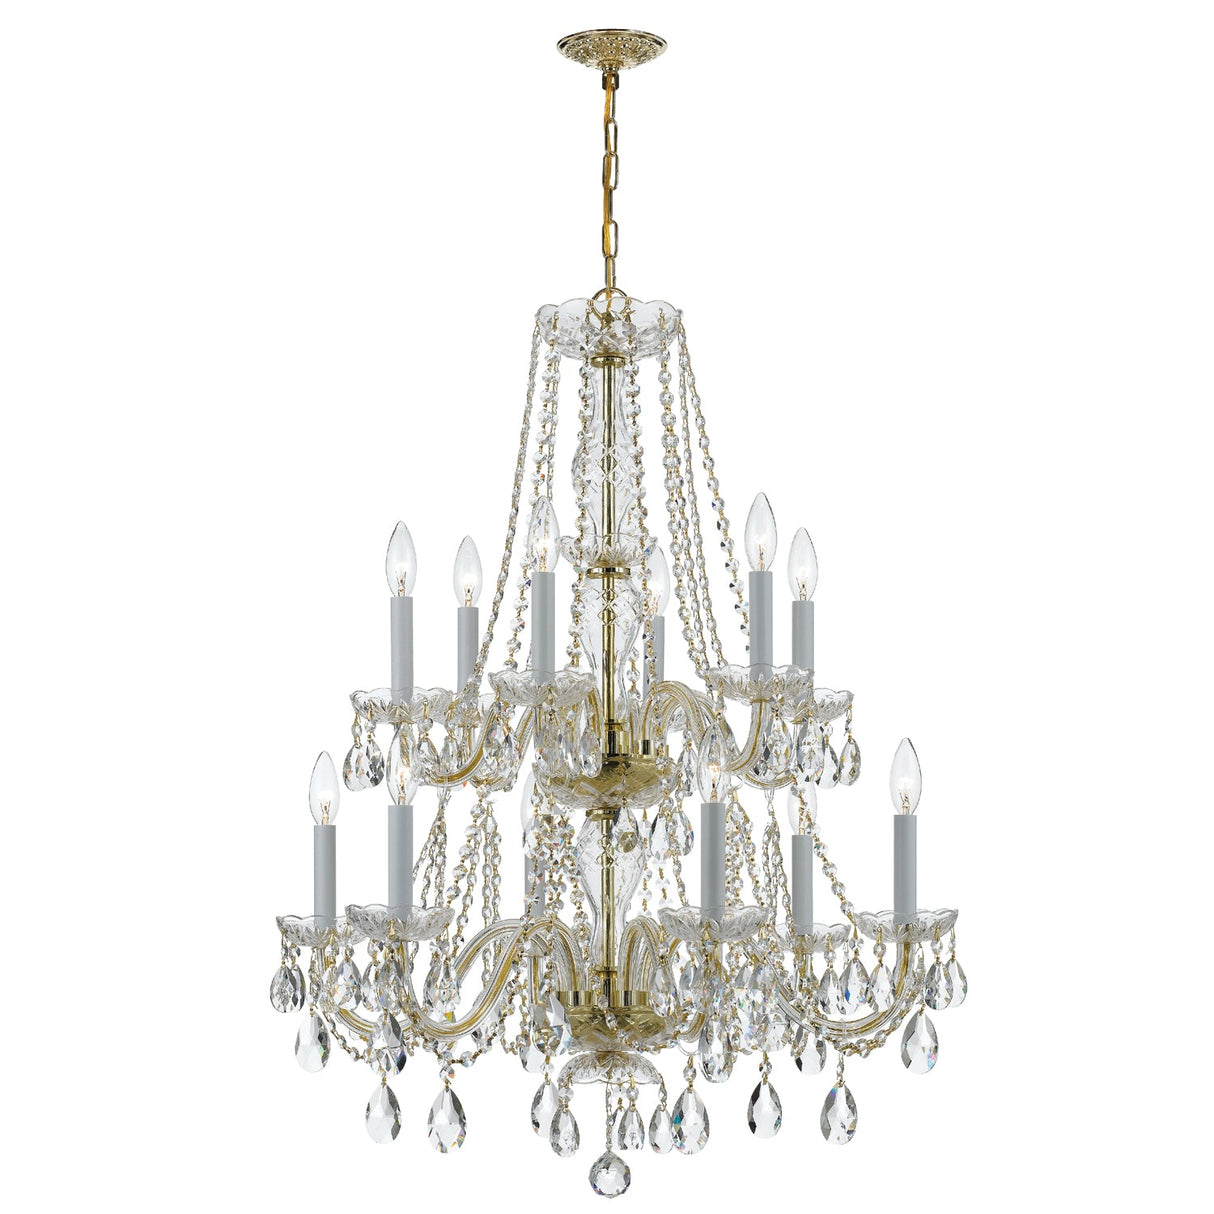 Traditional Crystal 12 Light Hand Cut Crystal Polished Brass Chandelier 1137-PB-CL-MWP